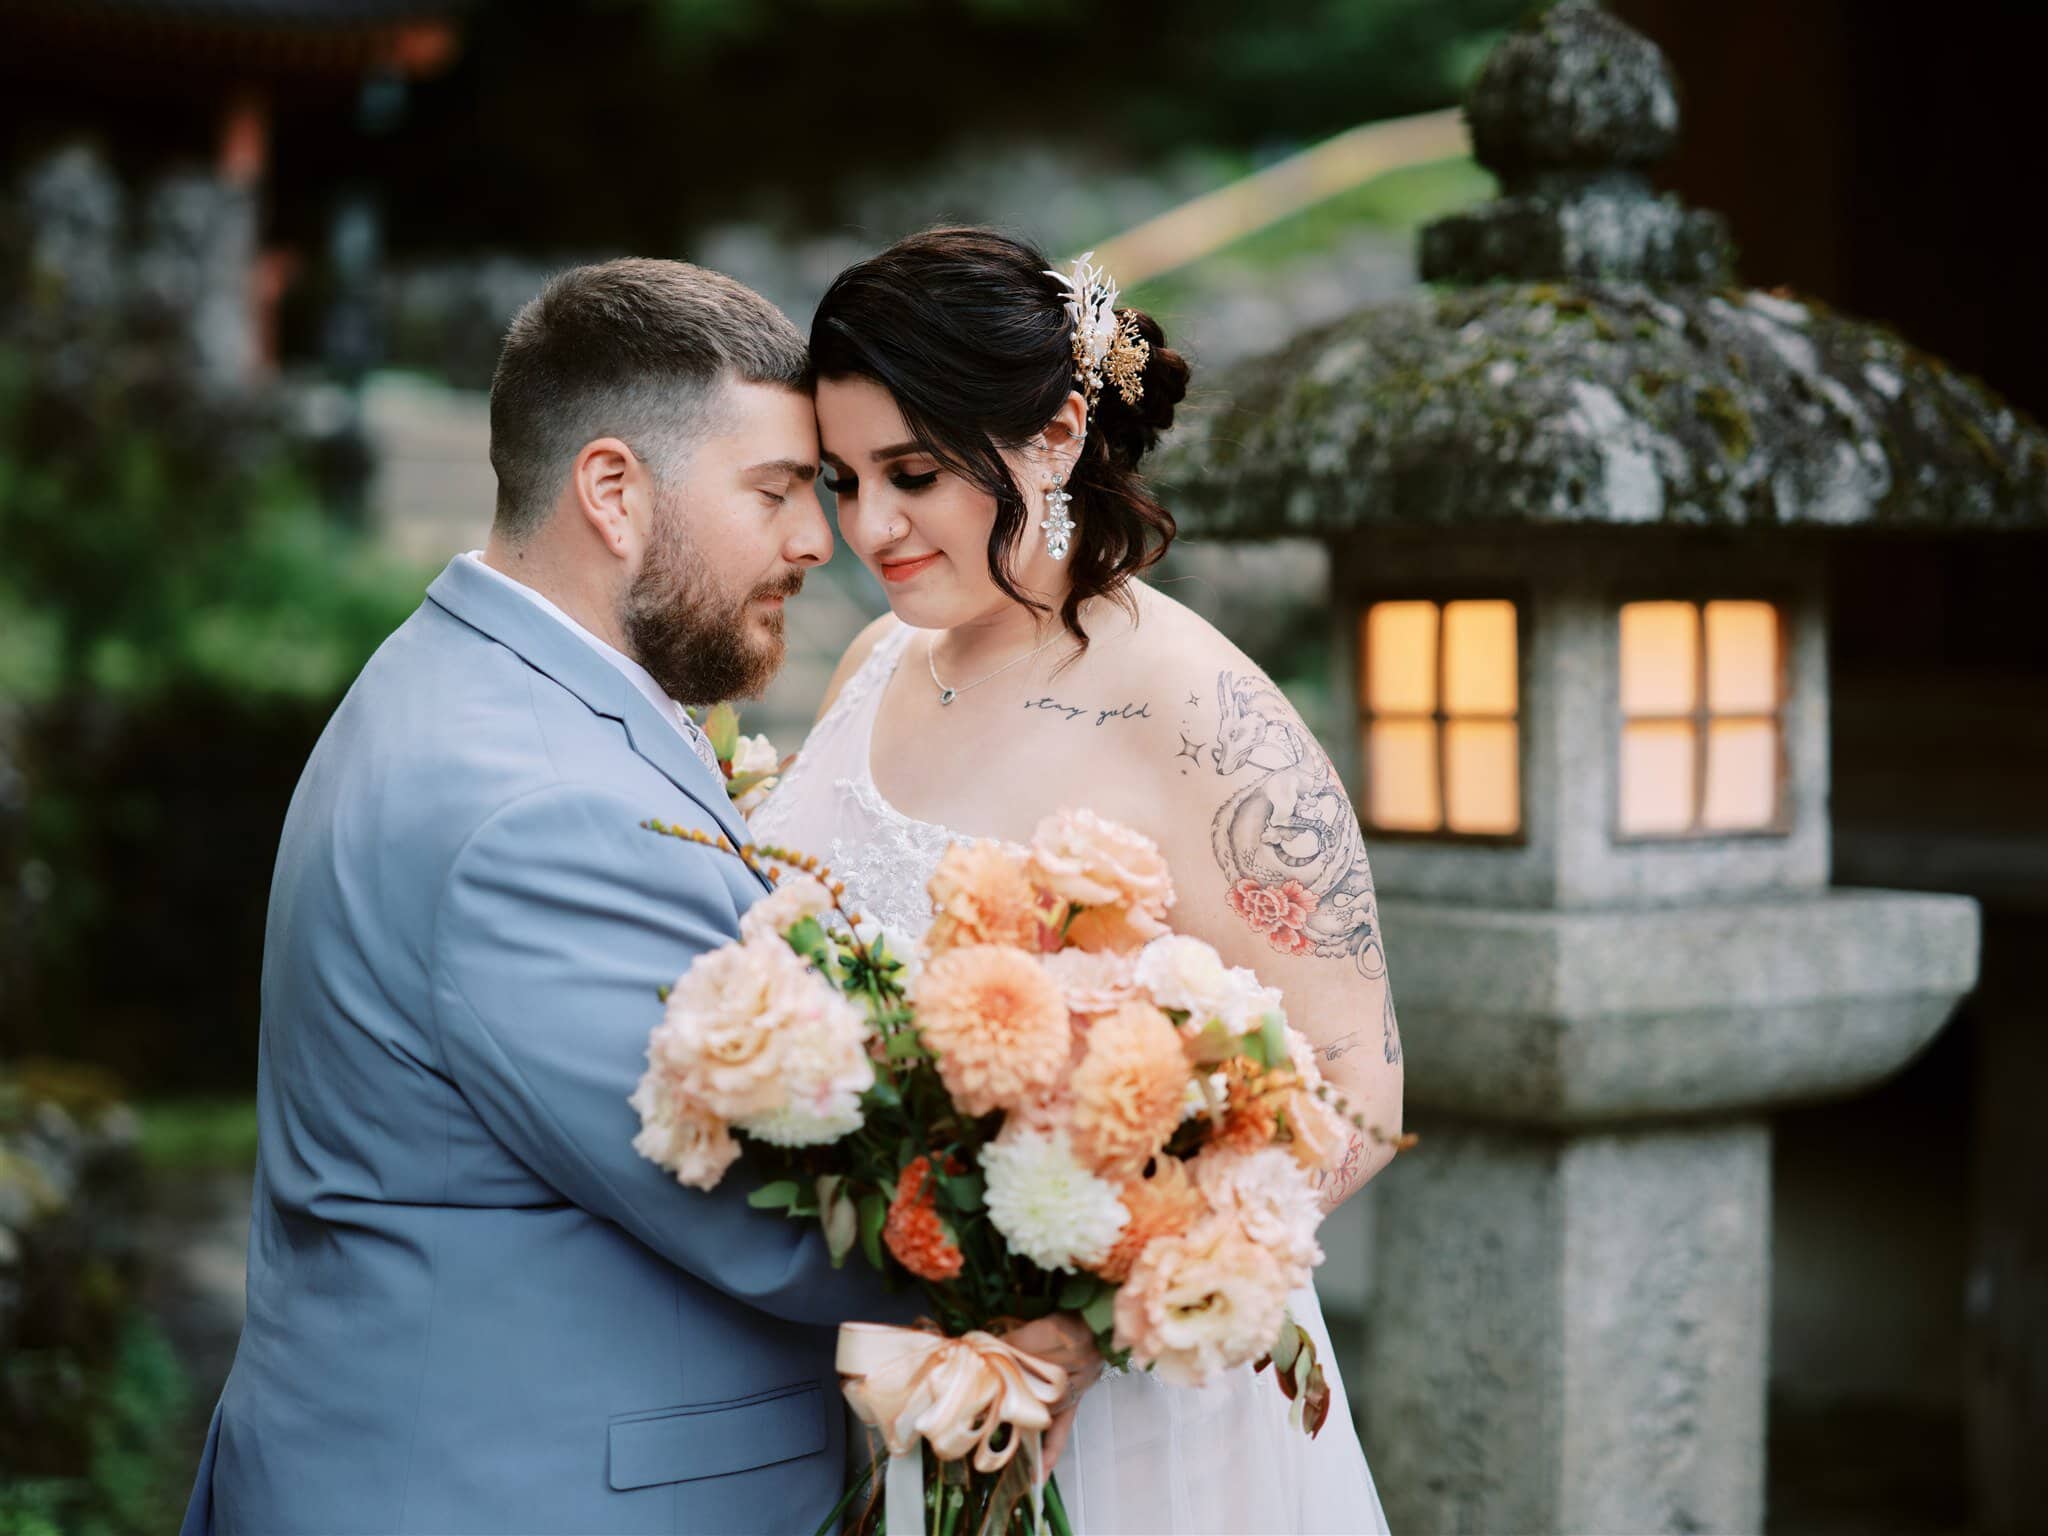 Kyoto Tokyo Japan Elopement Wedding Photographer, Planner & Videographer | A bride and groom standing in front of lanterns at a Japanese wedding captured beautifully by a skilled photographer specializing in Japan elopements.